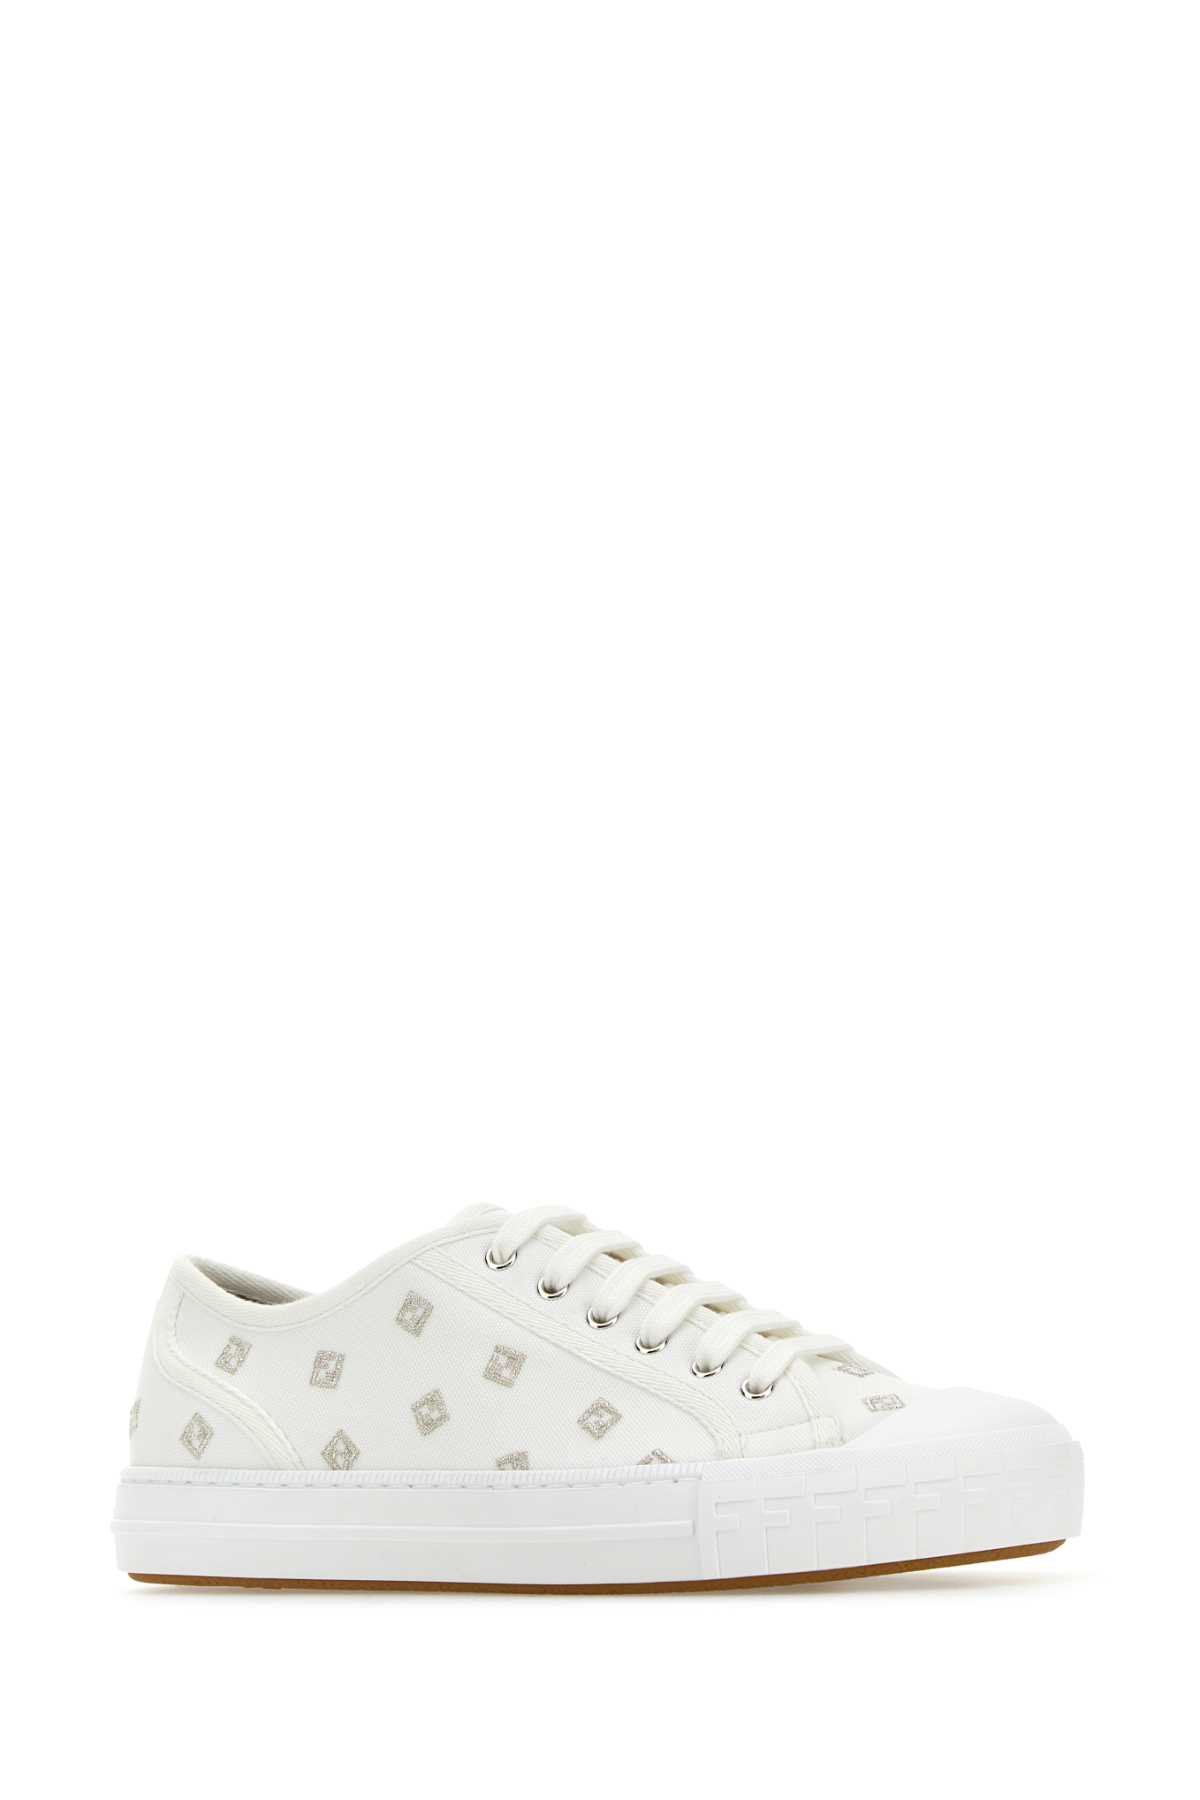 Shop Fendi Embroidered Canvas Domino Sneakers In Chalksilver